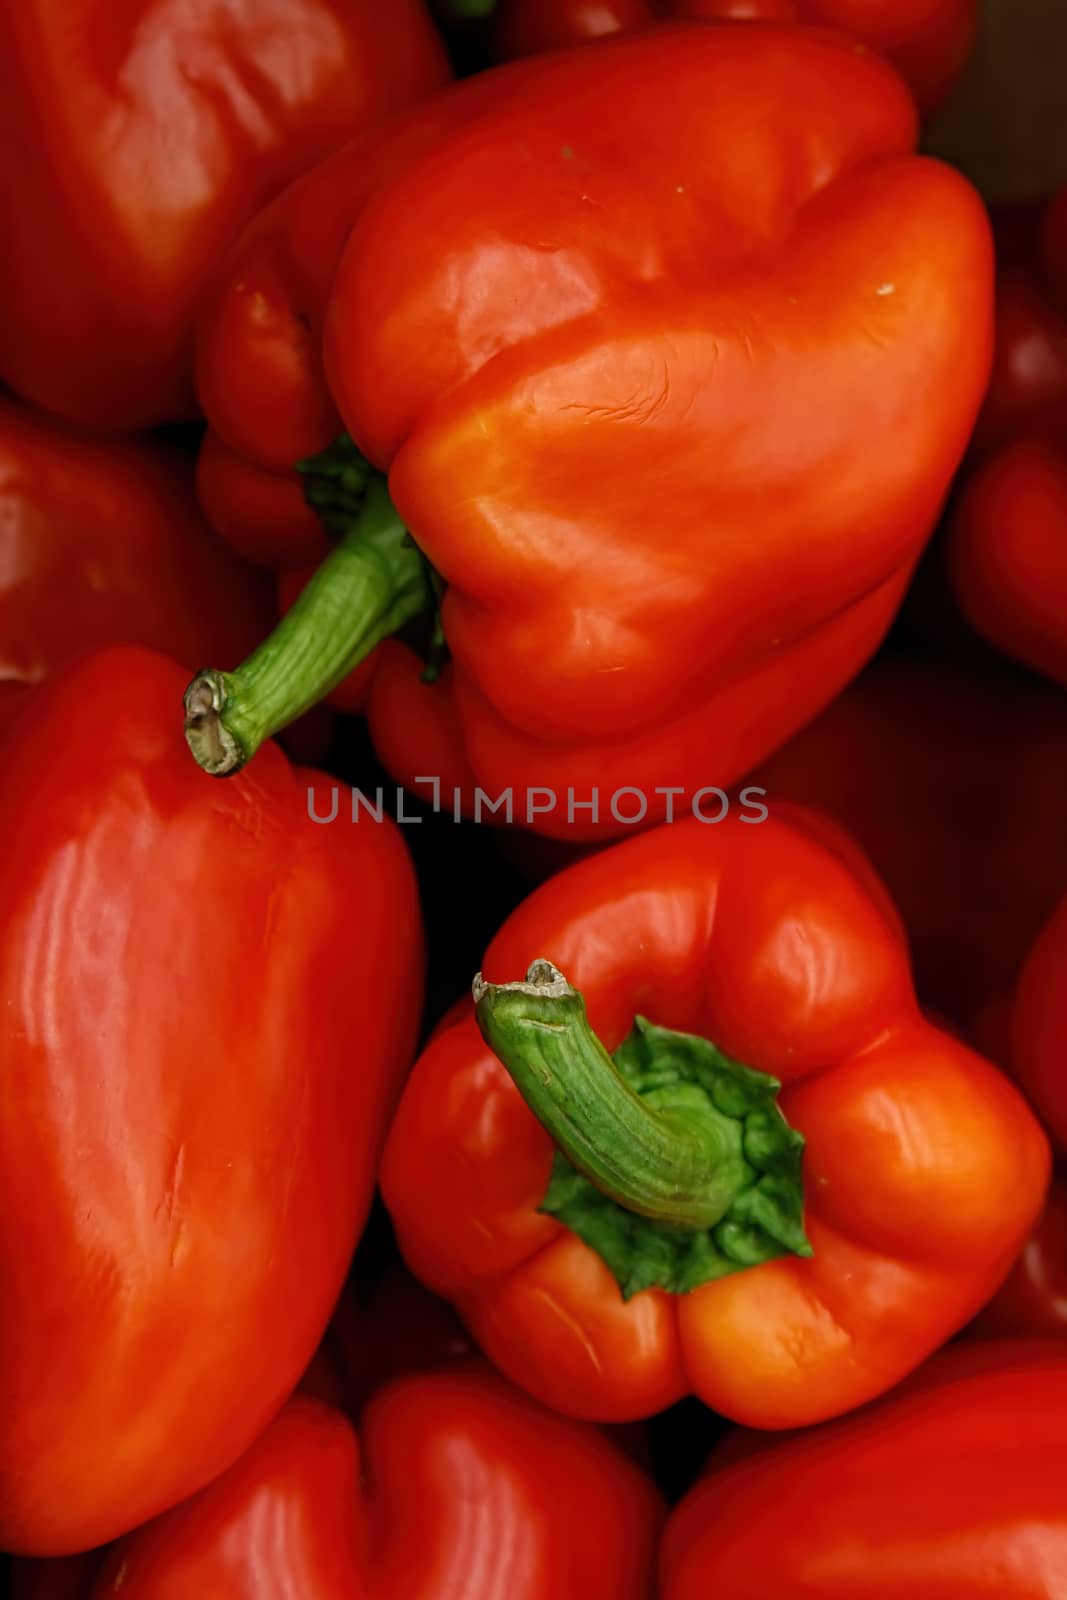 Abstract image of a bright red sweet pepper lying in a grocery store. The view from the top